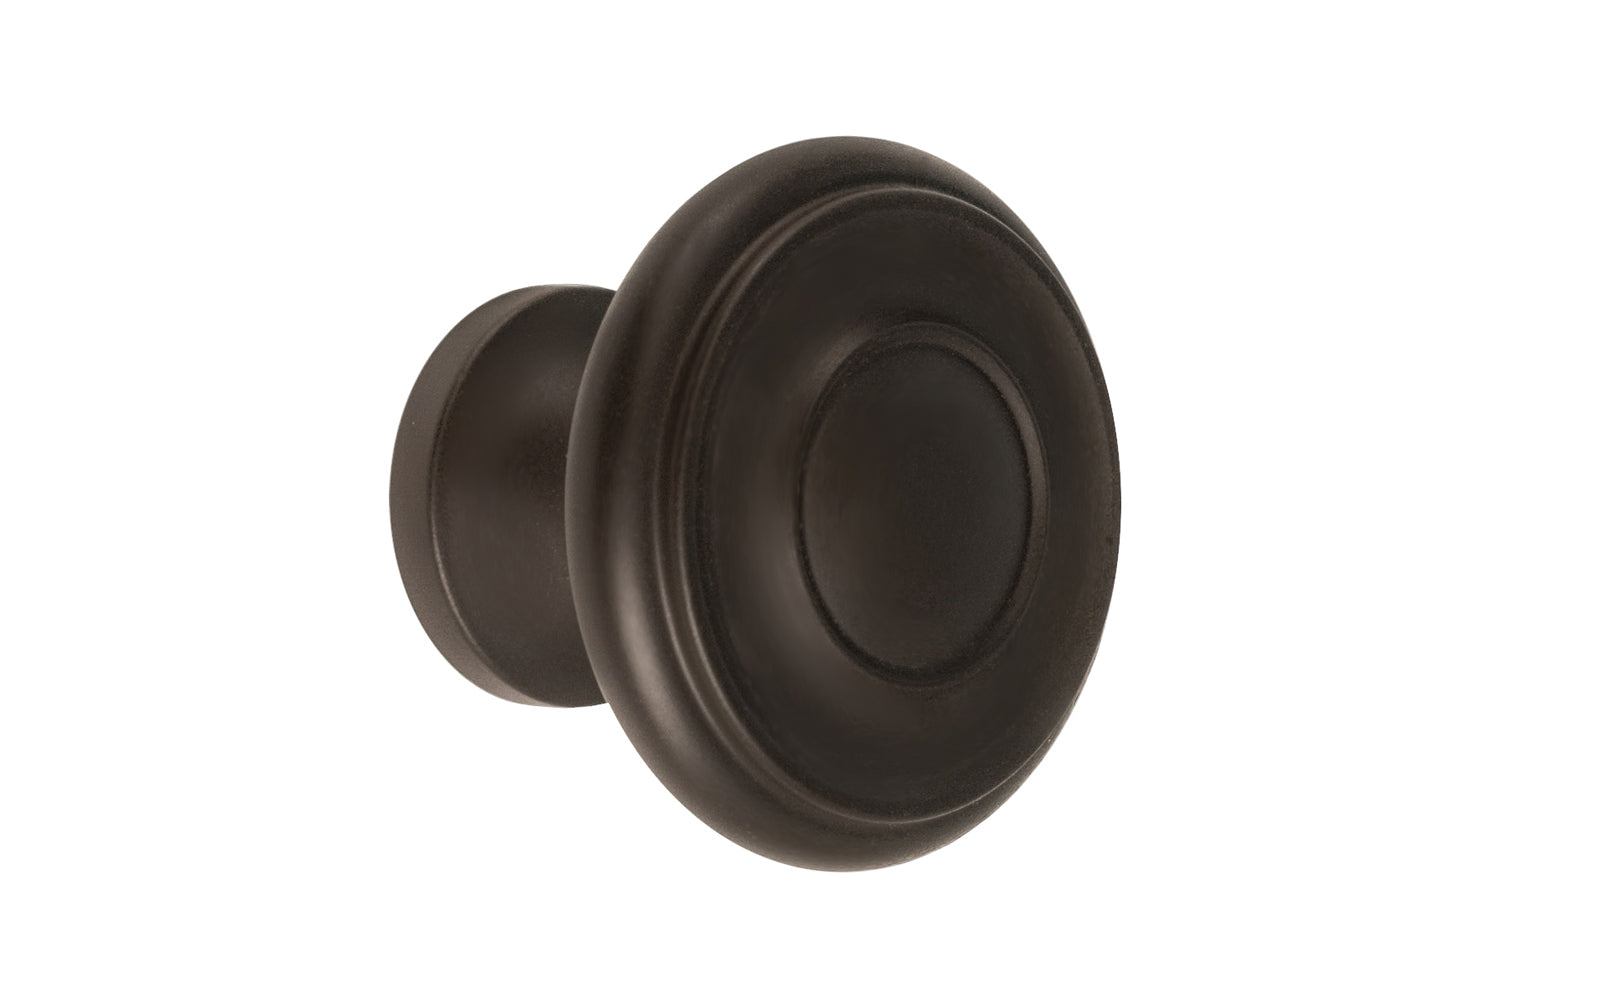 Vintage-style Hardware · Solid Brass classic contemporary / art deco, mid-century style cabinet knob. High quality solid brass 1-1/4" diameter Knob. Ideal for kitchen & bathroom cabinets, & furniture. Oil Rubbed Bronze Finish.